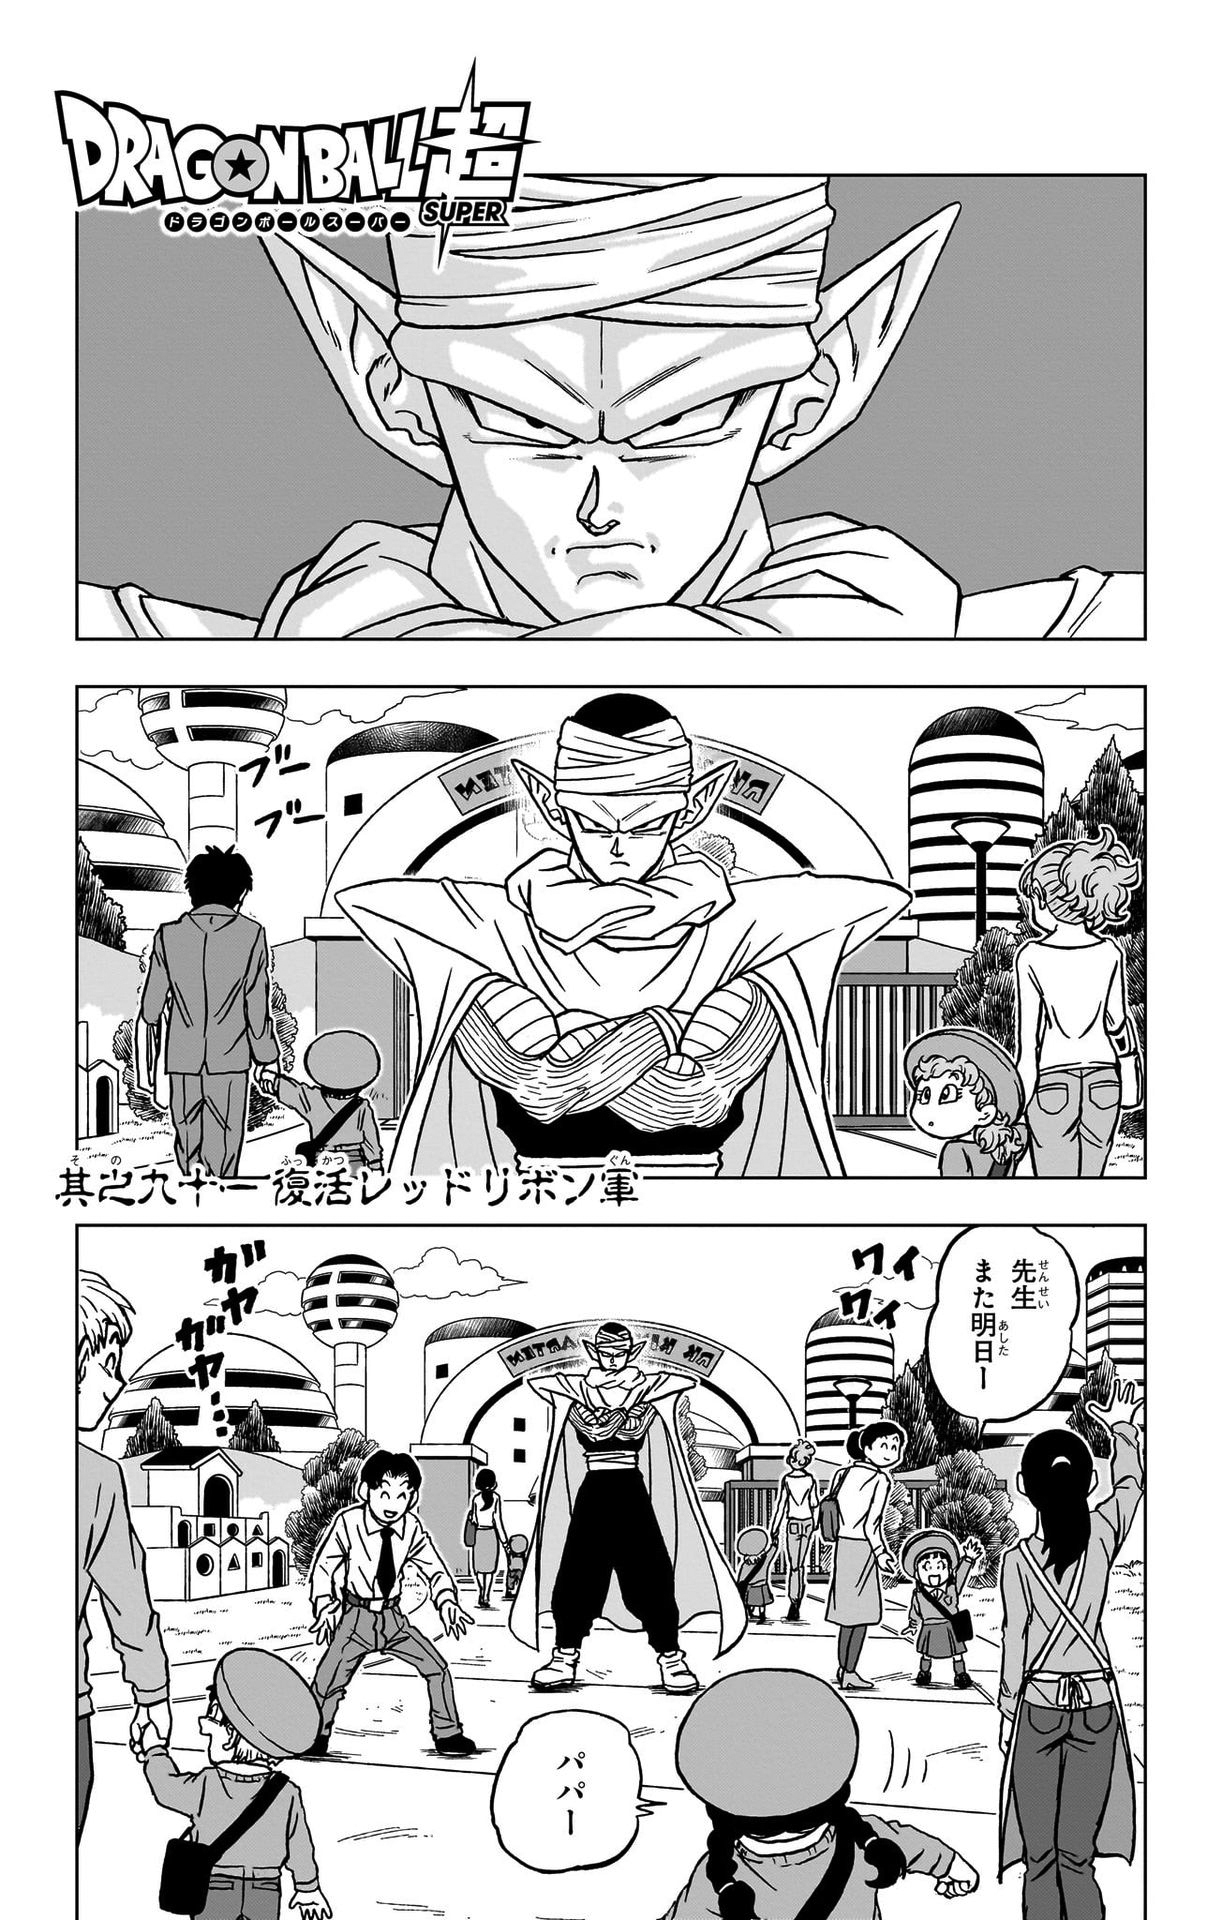 Dragon Ball Super - Chapter 91 - Page 1